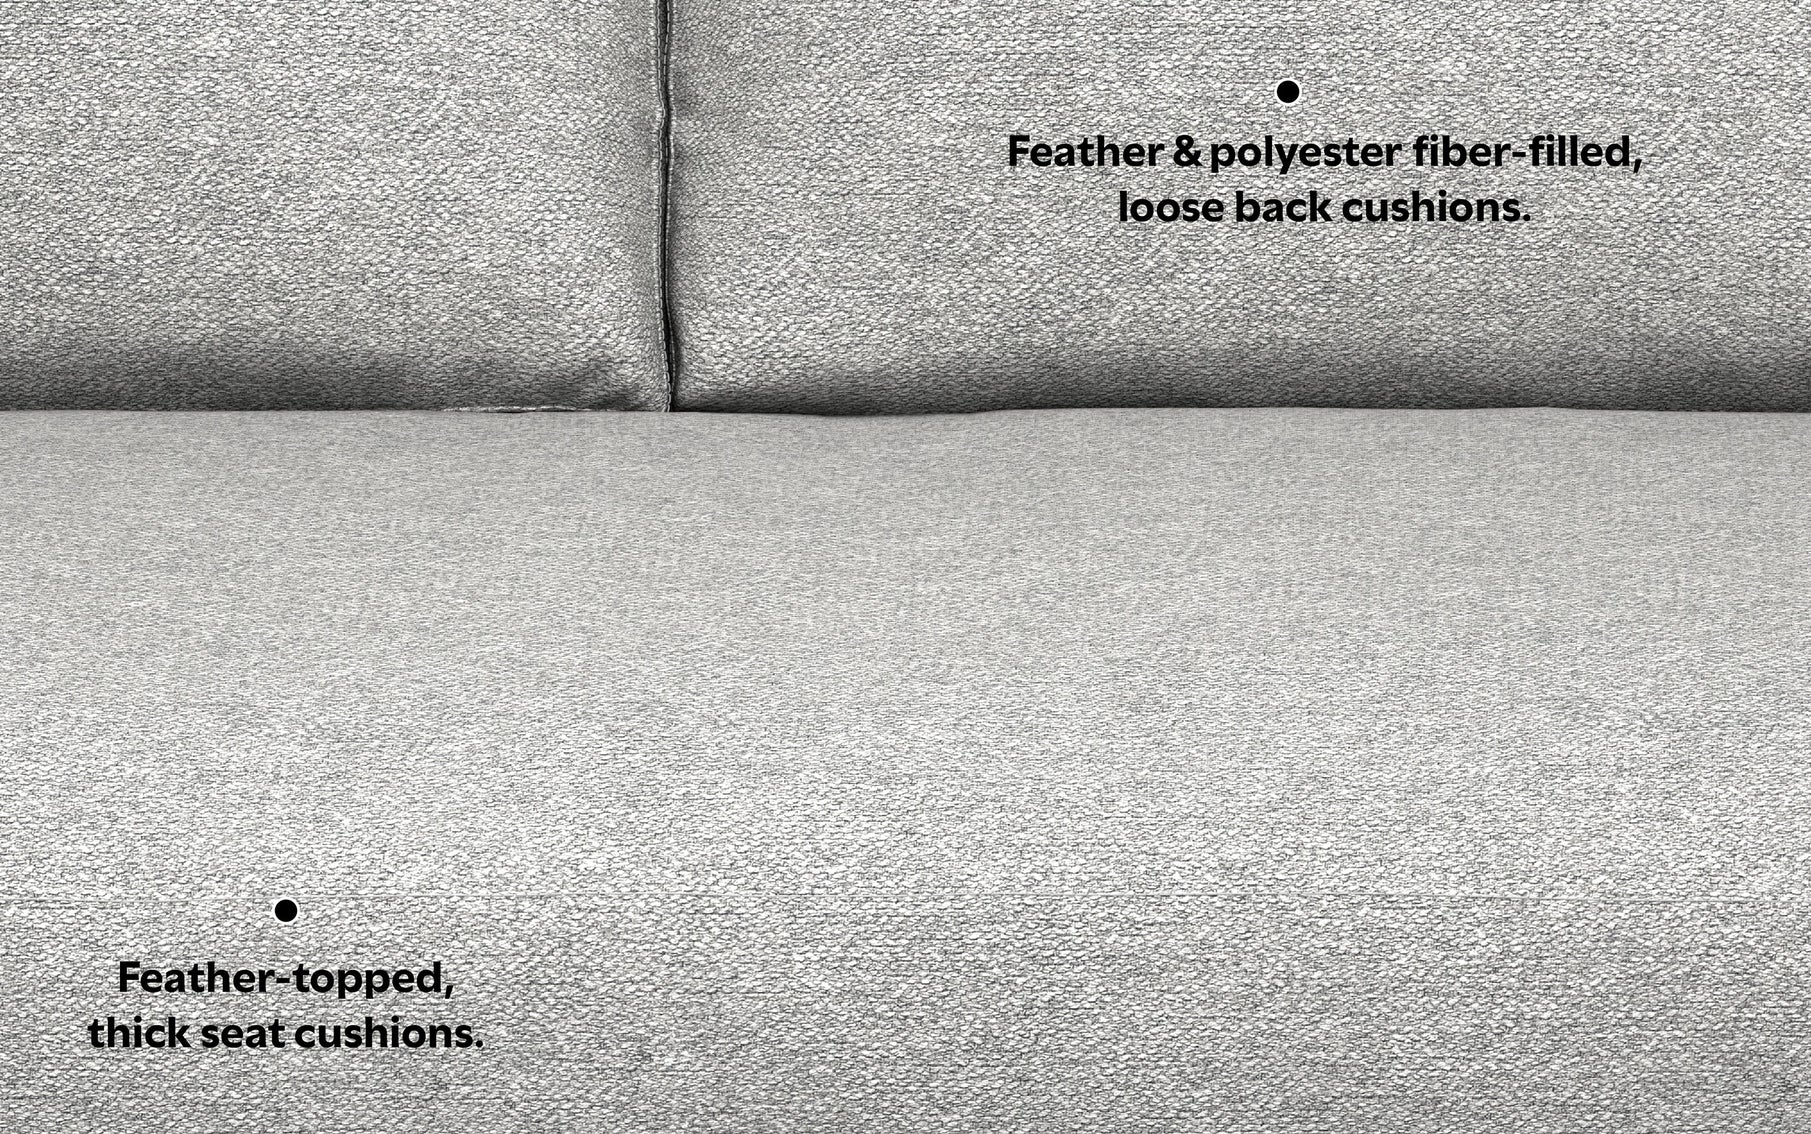 Mist Grey Woven-Blend Fabric | Morrison Mid Century Sectional